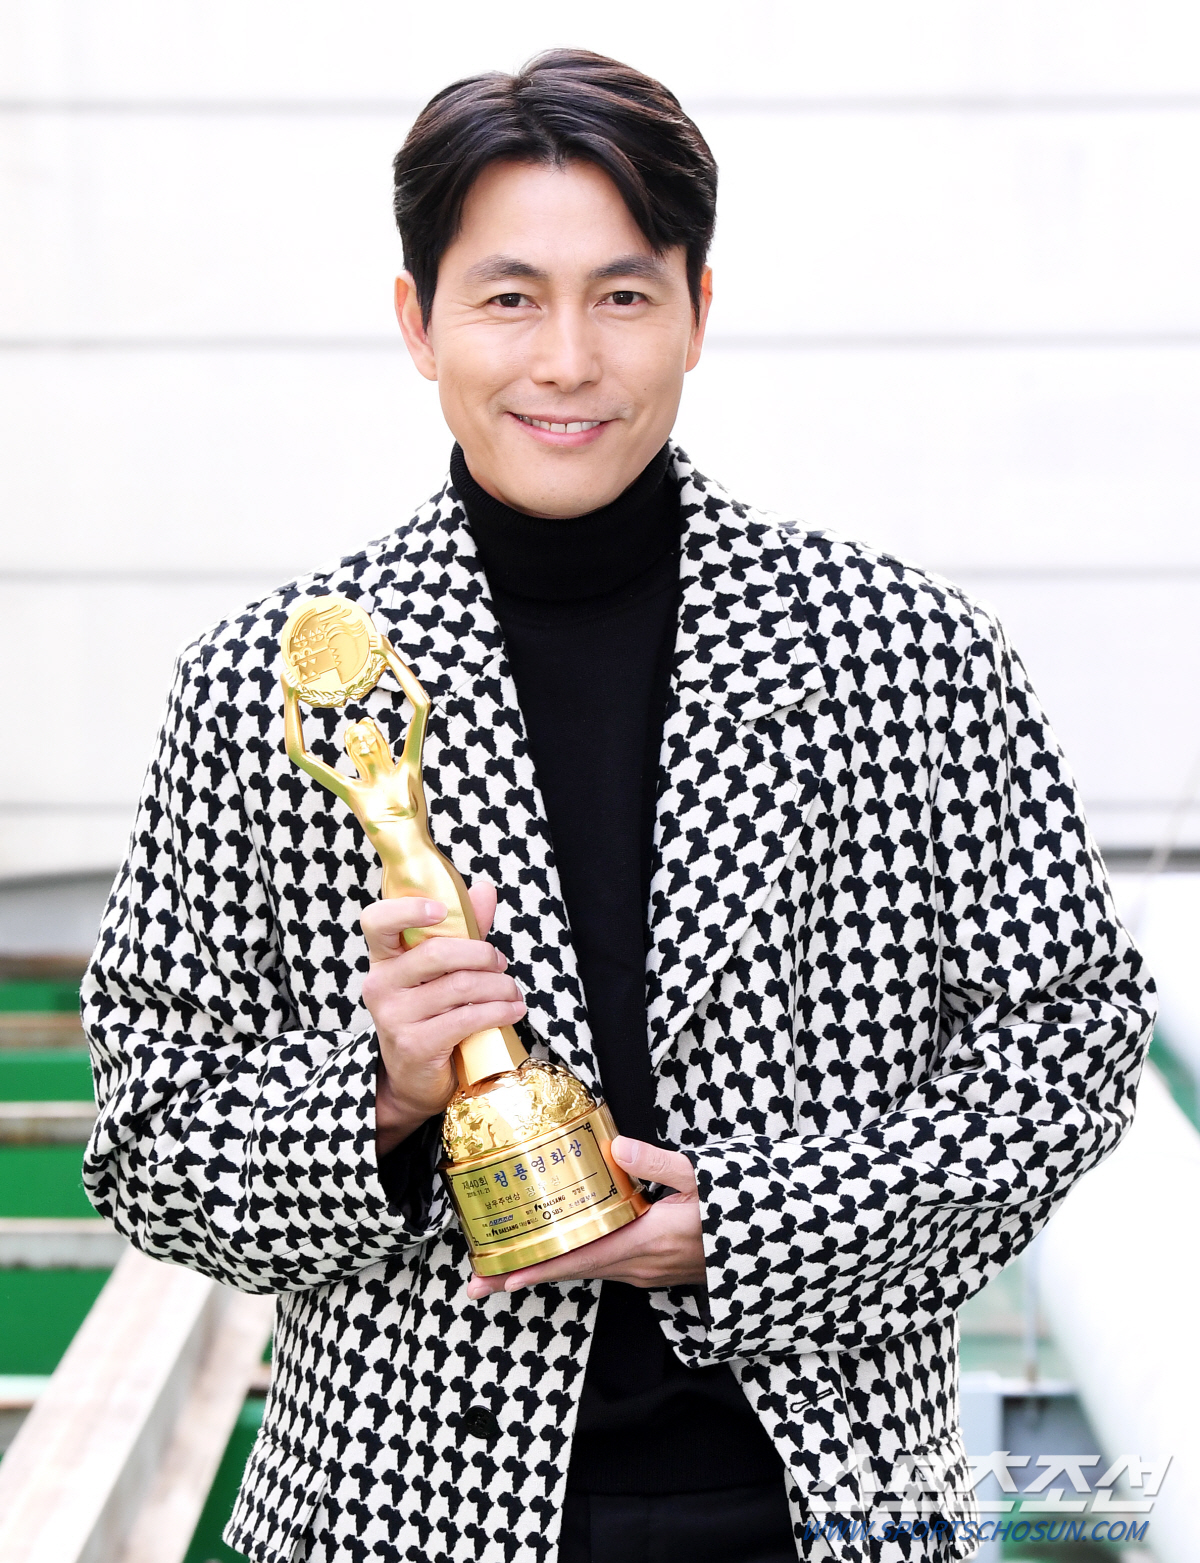 The Academy Awards for Blue Dragon Film, Lee Jung-jae liked it better than me.Actor Jung Woo-sung (46), who was the first to hold the Blue Dragon Film Awards in his arms in 25 years of debut.He was recognized for his stardom early on with four popular awards, but he was nominated for four Academy Awards and one Best Supporting Actor, but he had to drink to the Awards.In the film Innocent Witness (director Lee Han), where a lawyer who has to prove the innocence of a suspect in a murder suspect is the only witness to the crime scene, he met the autistic girl and met the autistic girl Jiu, and became the protagonist of the Blue Dragon Film Award.Jung Woo-sung, who attended the awards ceremony as the only candidate for Innocent Witness and even won the awards.Unlike other teams, Actor, who appeared immediately after the call, asked if he was sorry he could not share his joy with the staff. But I was very pleased to see (Kim) Body Chemistry as a prize winner.Body Chemistry had been waiting for me to say hello to me after finishing the supporting actor award, but I did not see my face on the day because the schedule time did not match.But Body Chemistry also congratulated me. I am also sorry that I am receiving a great honor for my work.Lee Han-chan, who was in the back of the celebration, also came to me with a pleasant joy, but I felt sorry for the director. The public expectation that has grown even more due to the Academy Awards.However, Jung Woo-sung said that he will continue to play Jung Woo-sung silently behind the burden.Of course, I have a responsibility to take the weight of the prize, but I think it is important to walk Jung Woo-sung in the future as I have lived every moment to save all the characters and find out what I am.If Actor meets the character in the movie is the completion of the movie, life is a process of finding out what Jung Woo-sung is like.Ive never tried to lean on or settle for anyone, and Ive been looking for myself more than someone wants me to be.I made my debut as a youth star, and I was not only the publics desire, but also the one who was in charge of this and that, and sometimes I heard the word Why do not you do it?But in other ways, I have tried such various attempts, so flexible expressions seem to be given to myself. Jung Woo-sung, who is in the midst of preparing for his first production Protector following the film production.Asked if he had any desire for the new director awards, he laughed, saying, I am too brazen to aim for now. I just think I want to shoot well now.I went to location hunting yesterday, and I think I might have the shame to think about the new director award according to the finished book, or I will think about getting better next time.I hope you have a lot of expectations. I think expectation will be a good stimulus to make it more faithful as a director in the field. Jung Woo-sung, who has lived as an actor for 25 years, is challenging the production beyond production. What does it mean to him that movie means?Jung Woo-sung replied, It is hard to easily define what it means.The nature of the work of film is long. One work is given several months of time.So, naturally, the time of privacy is reduced and all the time of everyday life flows into work-related meetings and thoughts. In fact, if you ask what does the movie mean to you, you can not easily answer.Already I am too much of a person in the movie In to see what it means to Jung Woo-sung in the movie Out.However, it is certain that the whole time I have been in is the movie itself. 